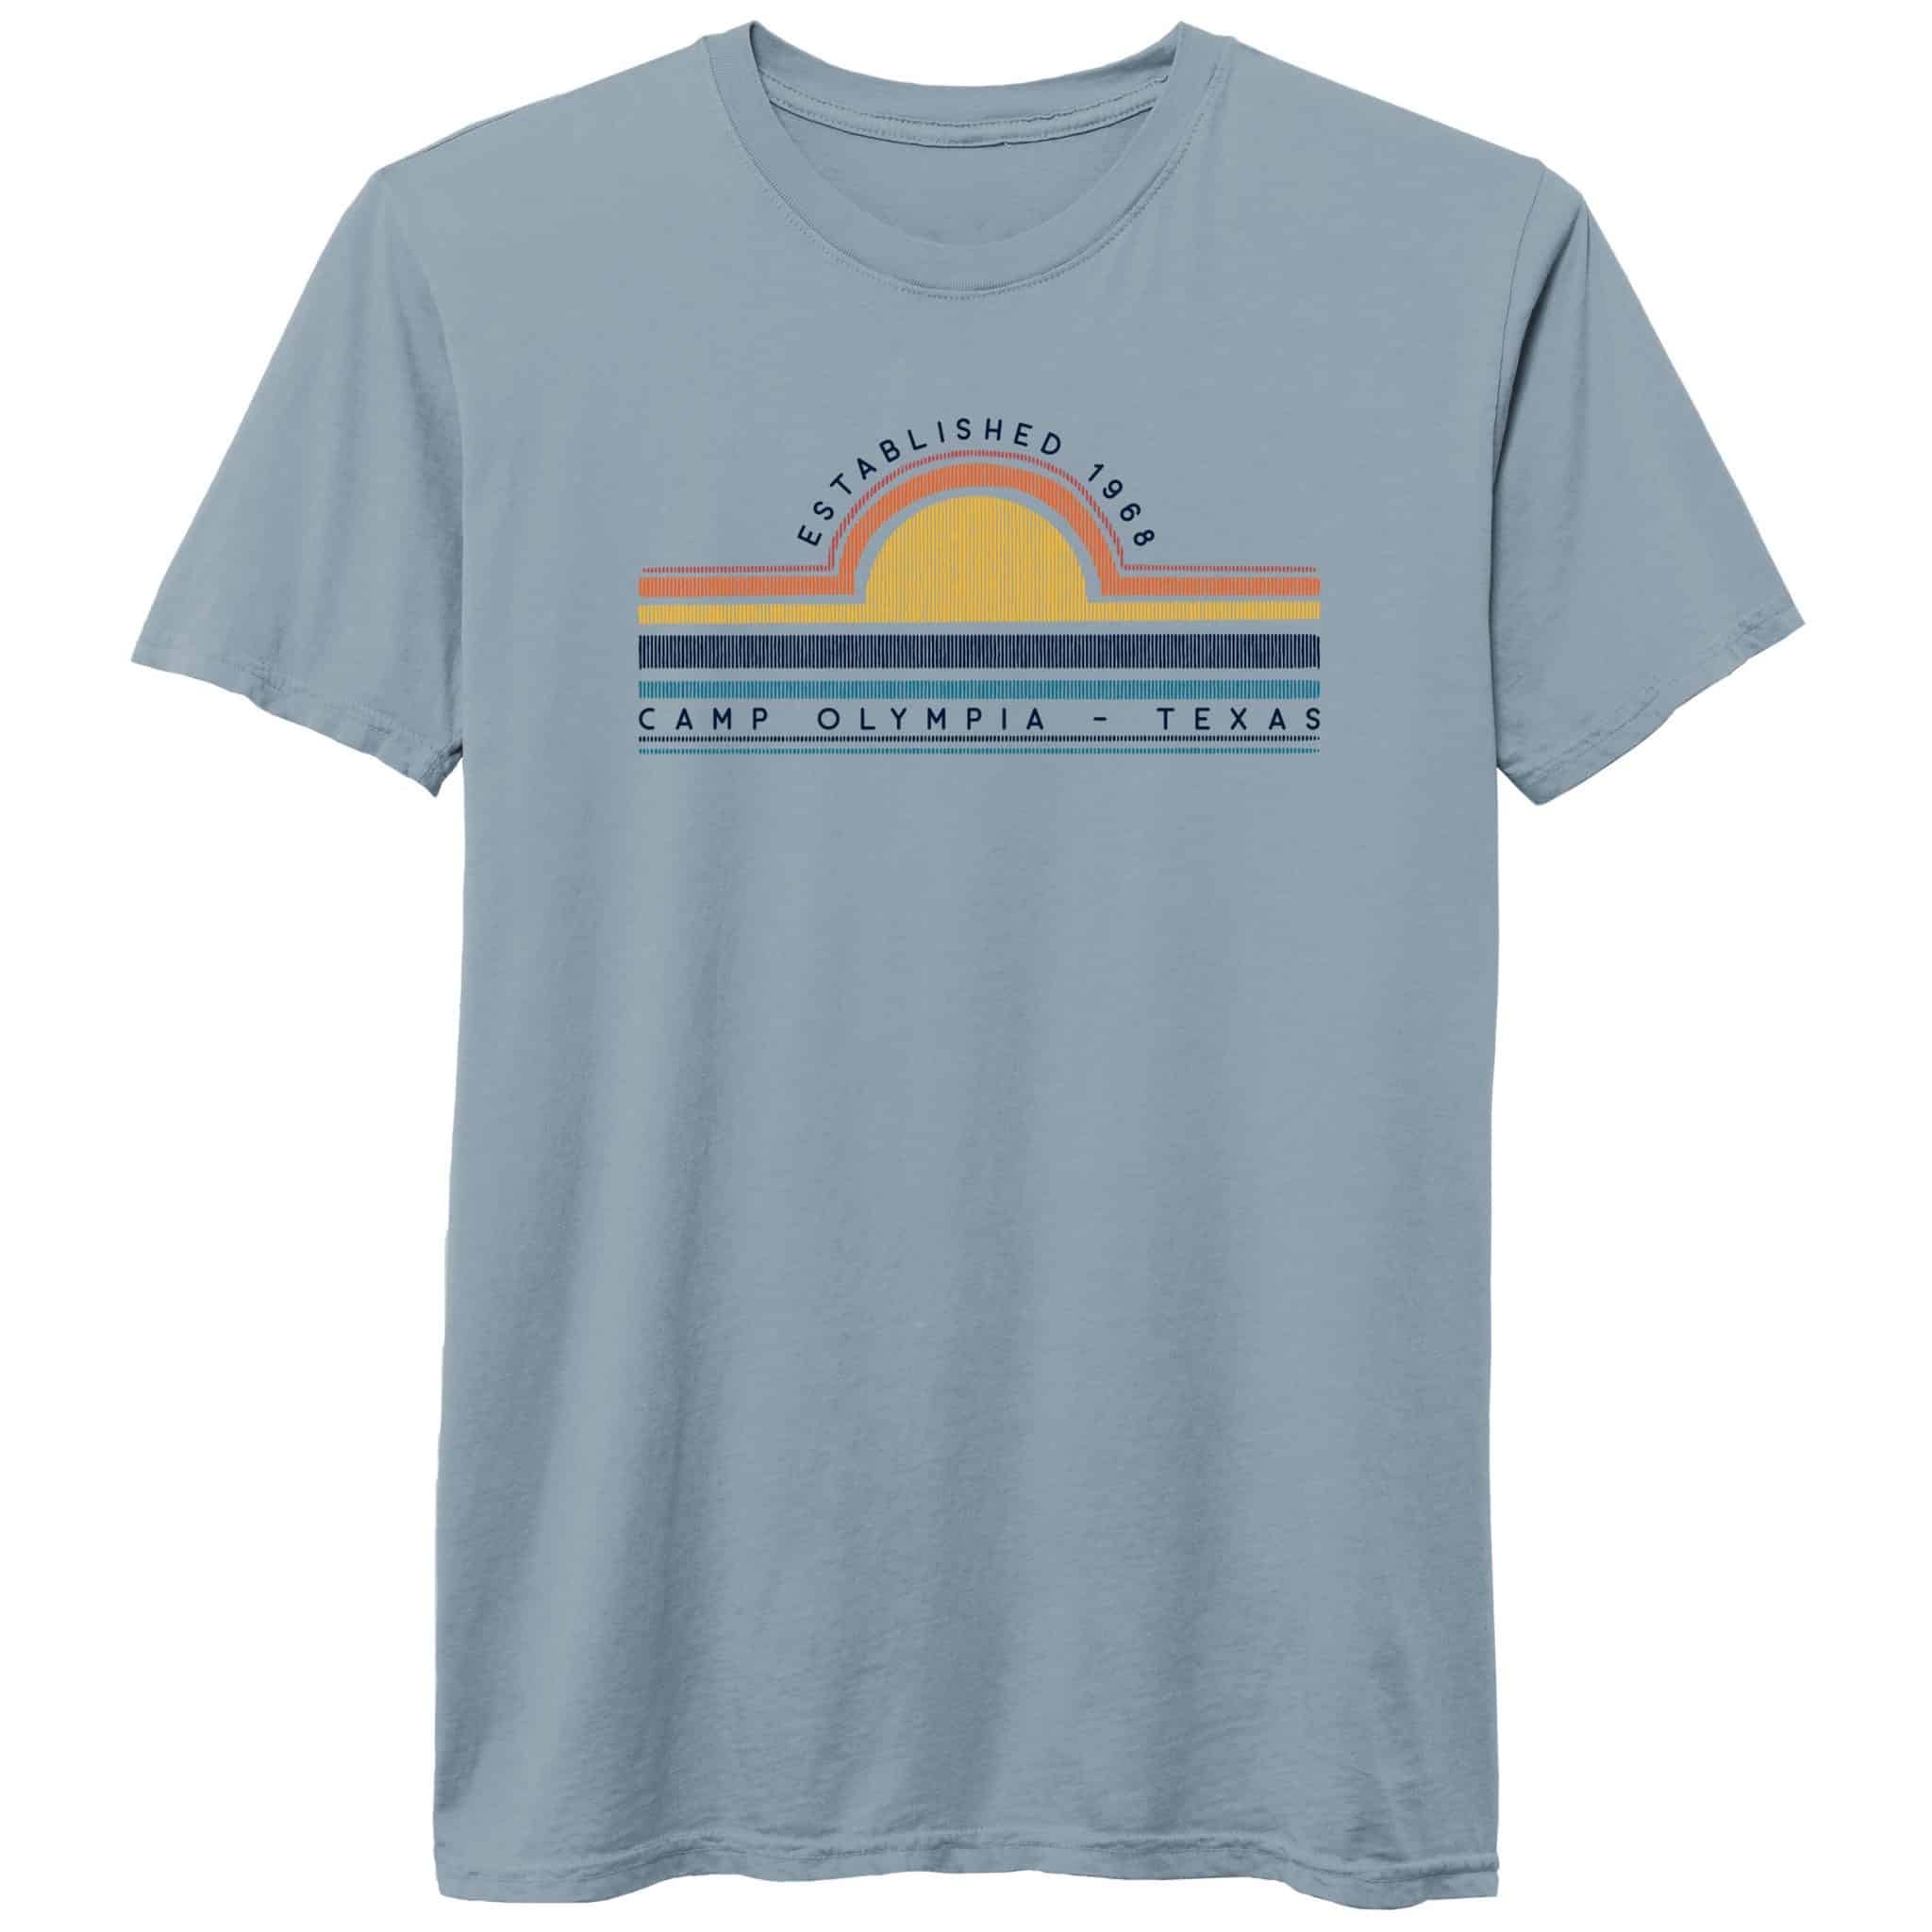 Camp Olympia T-shirt with Stripes - Blue